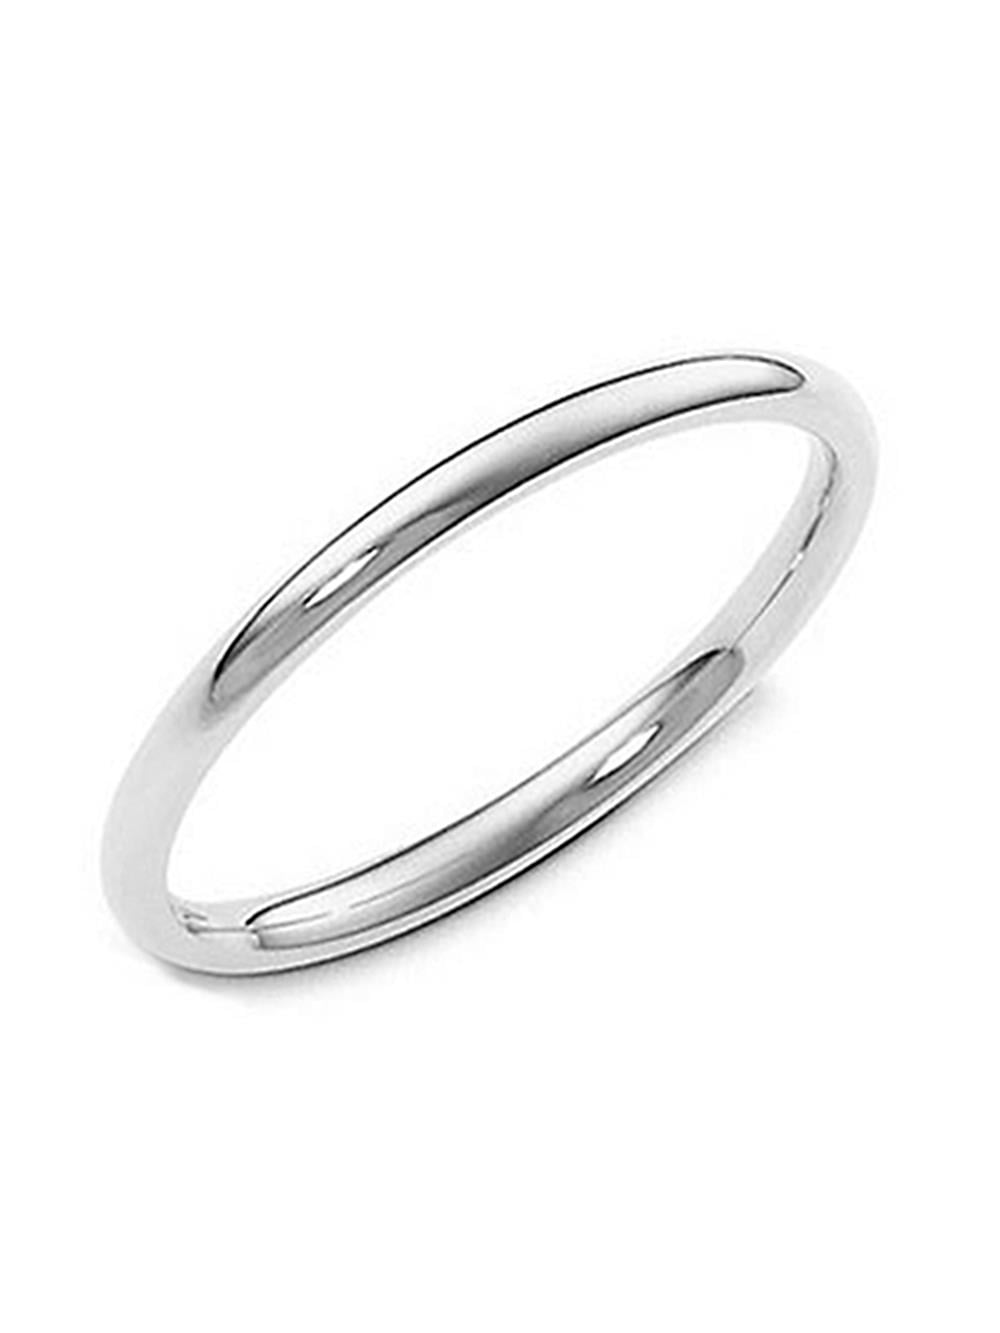 Plain Dome Wedding Band 3mm to 8mm TIONEER 925 Sterling Silver High Polish Tarnish Resistant Comfort Fit Ring 